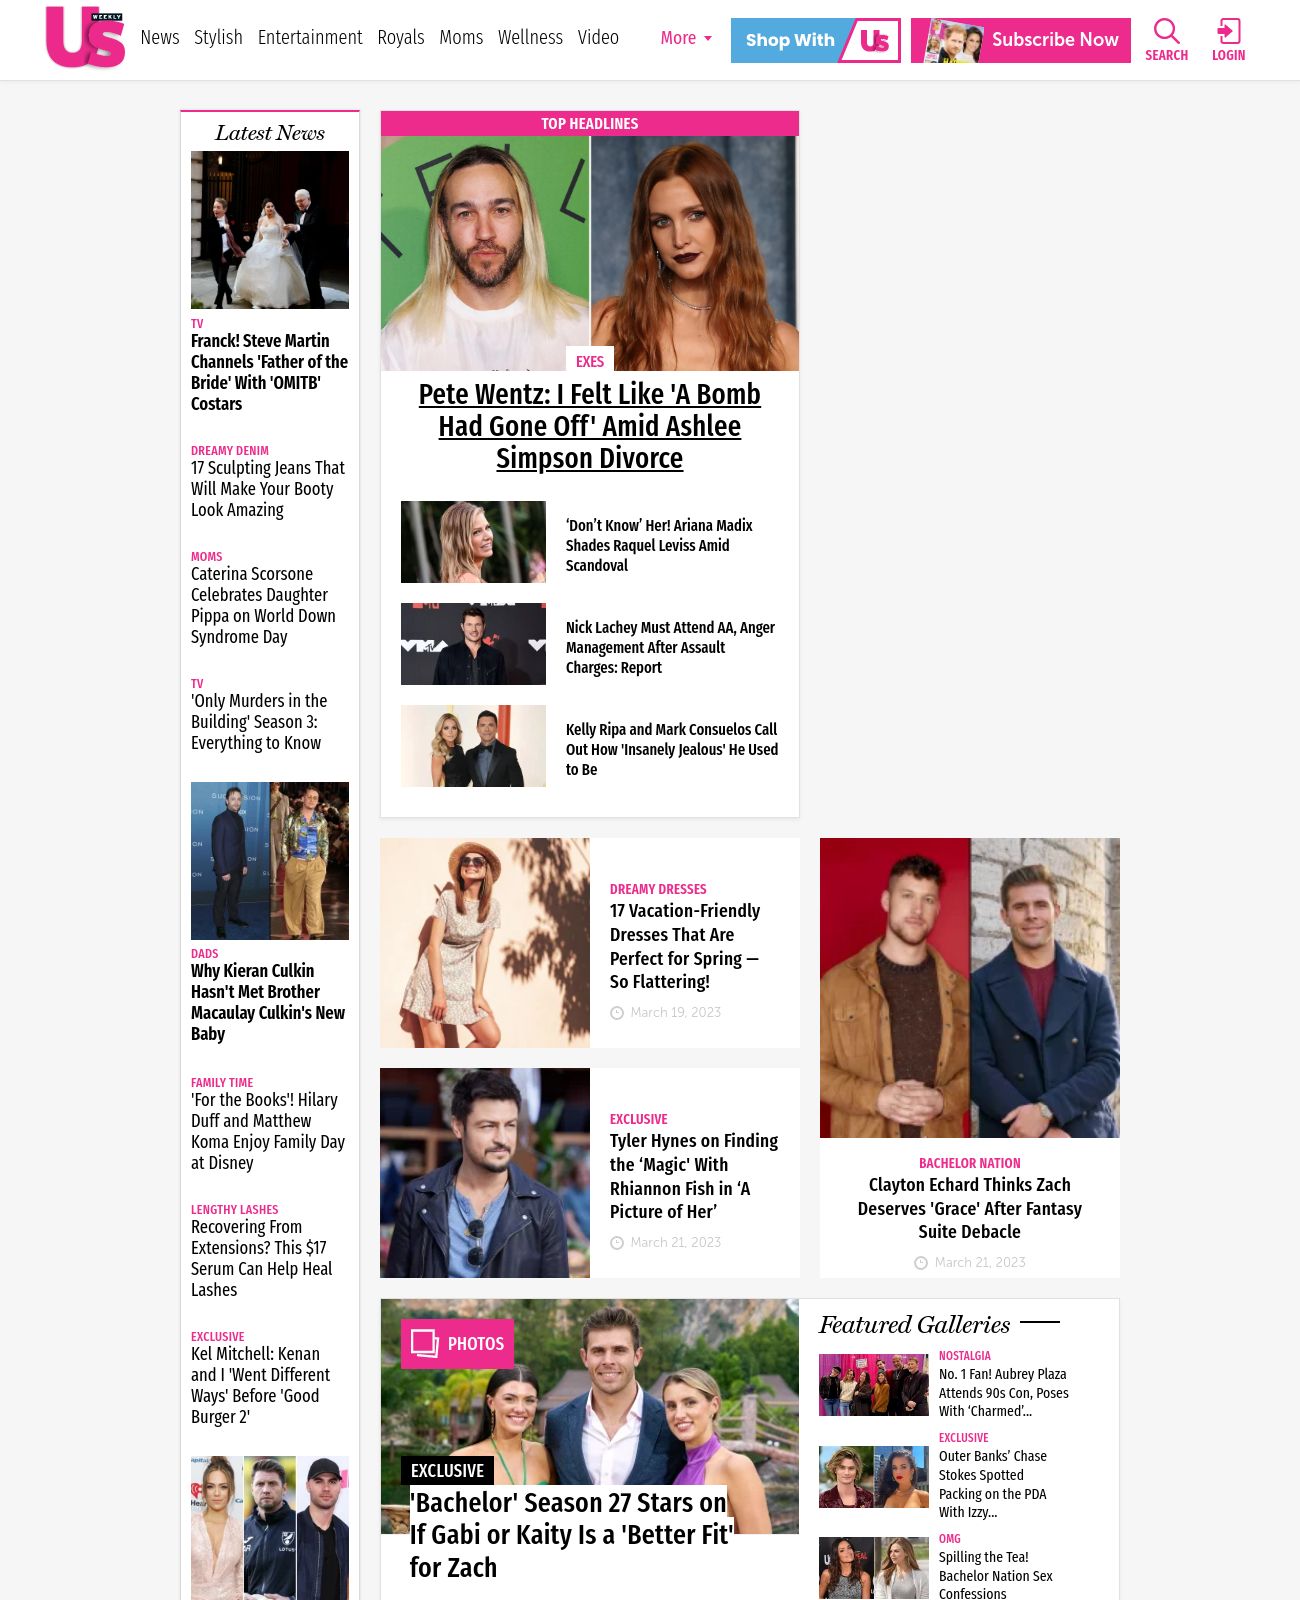 Us Weekly at 2023-03-22 00:49:26-04:00 local time